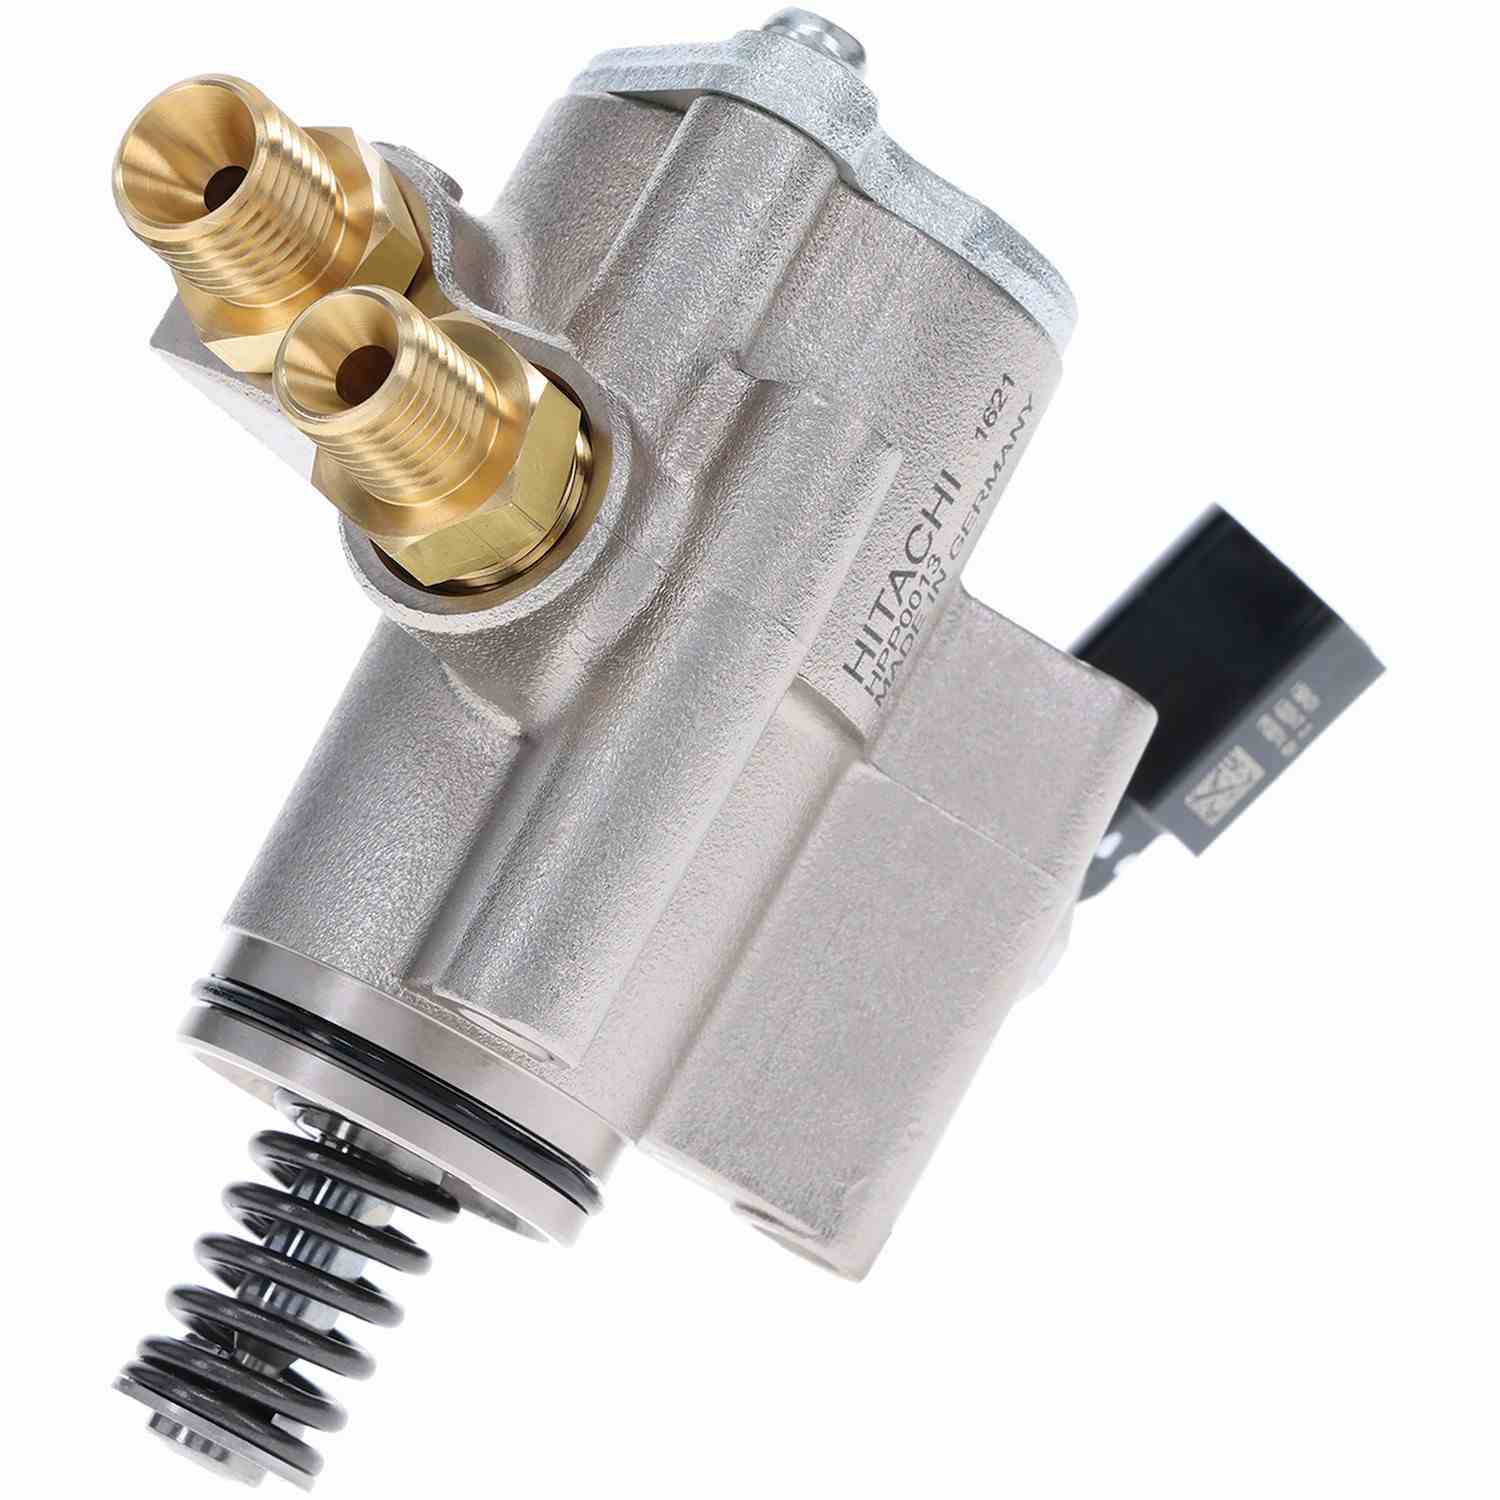 Back View of Direct Injection High Pressure Fuel Pump HITACHI HPP0013